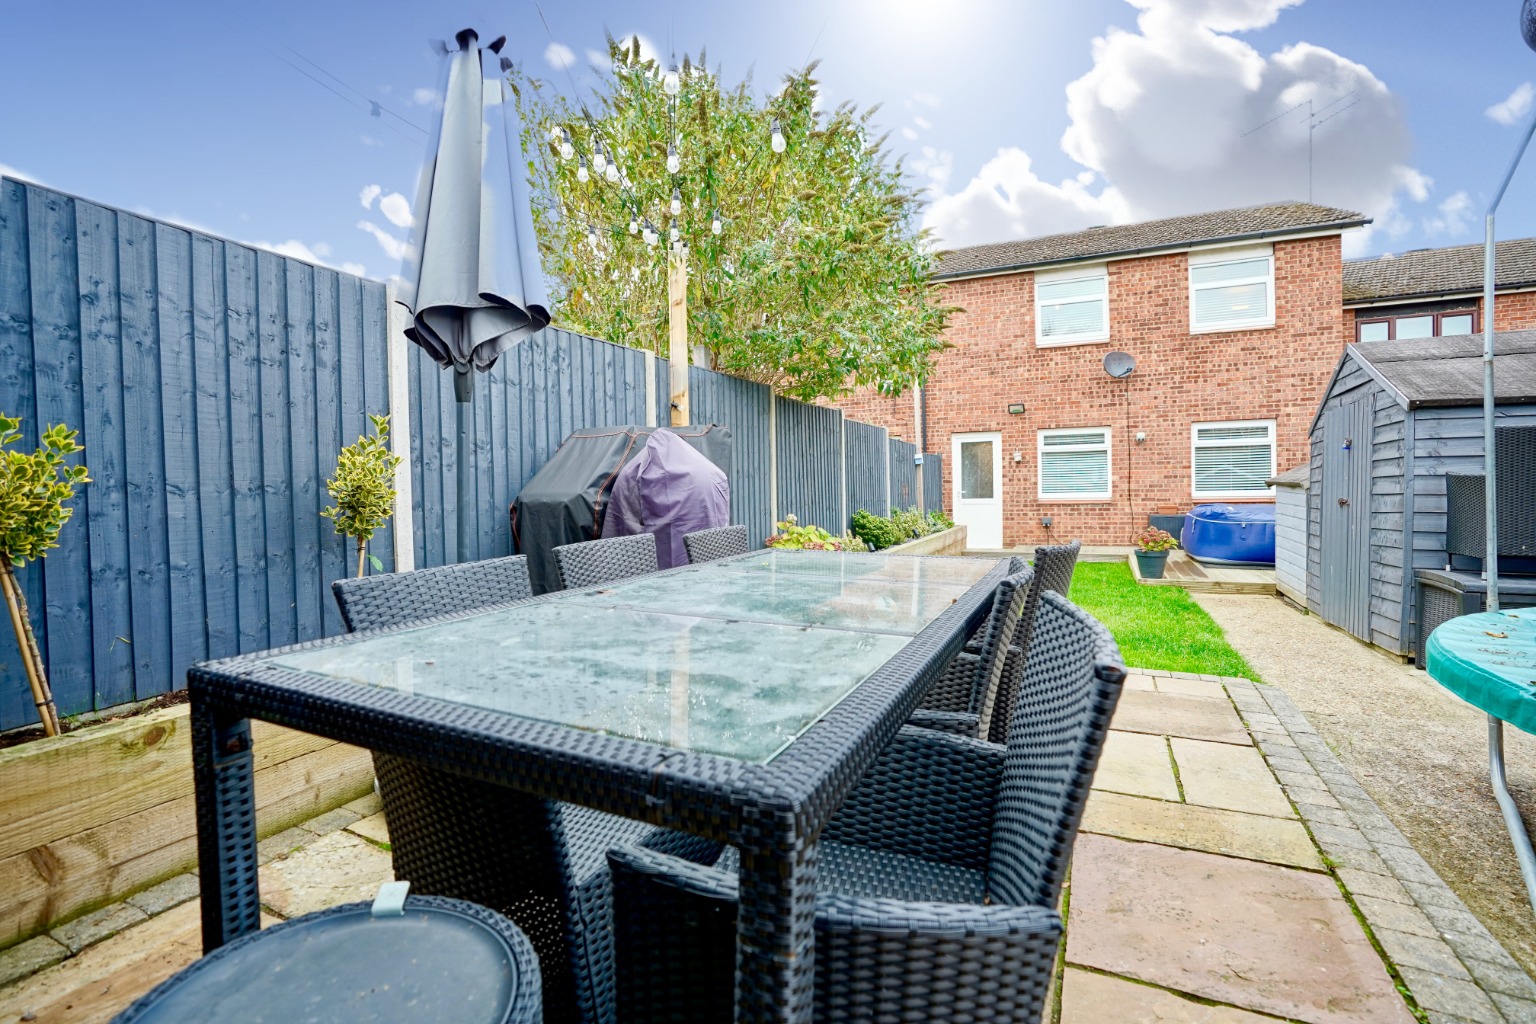 We are pleased to offer this spacious family home set in a cul-de-sac and has a re-fitted kitchen/diner, three good size bedrooms, landscaped rear garden, residents parking area. viewing is highly recommended so contact us to arrange your viewing...